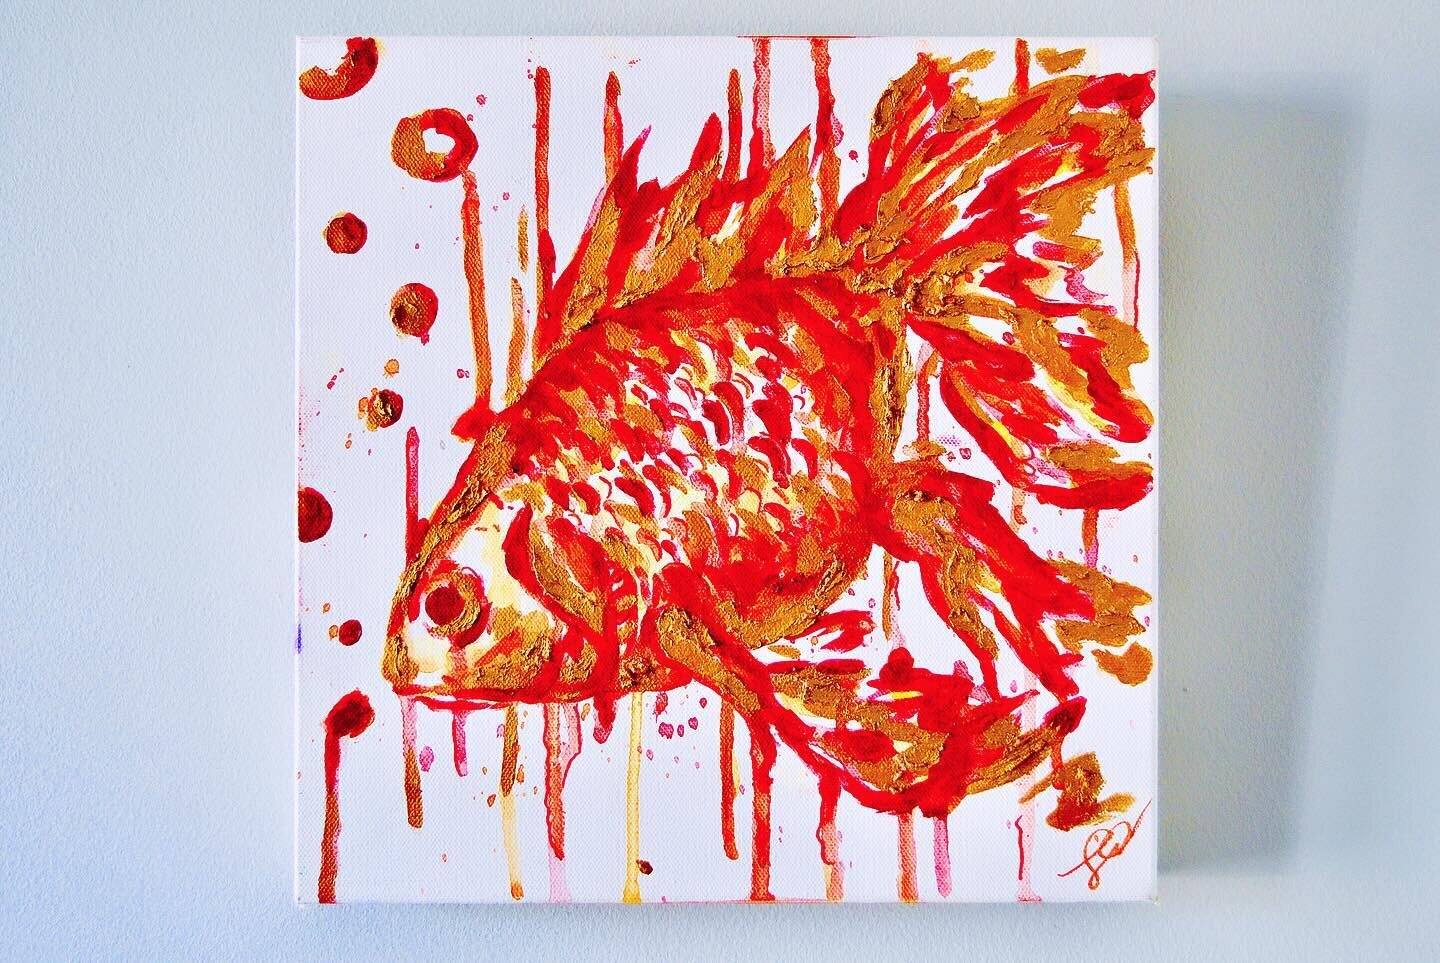 The spring clearance continues! ⭐️🐟(FOR SALE) 

$175
&ldquo;Goldfish&rdquo; (&hellip;. Get it bc hes gold) 
12 x 12
Oil and gold paste on canvas 
1 1/2 inch gallery wrapped profile canvas 

This lil guy is such a happy piece and he&rsquo;s looking f